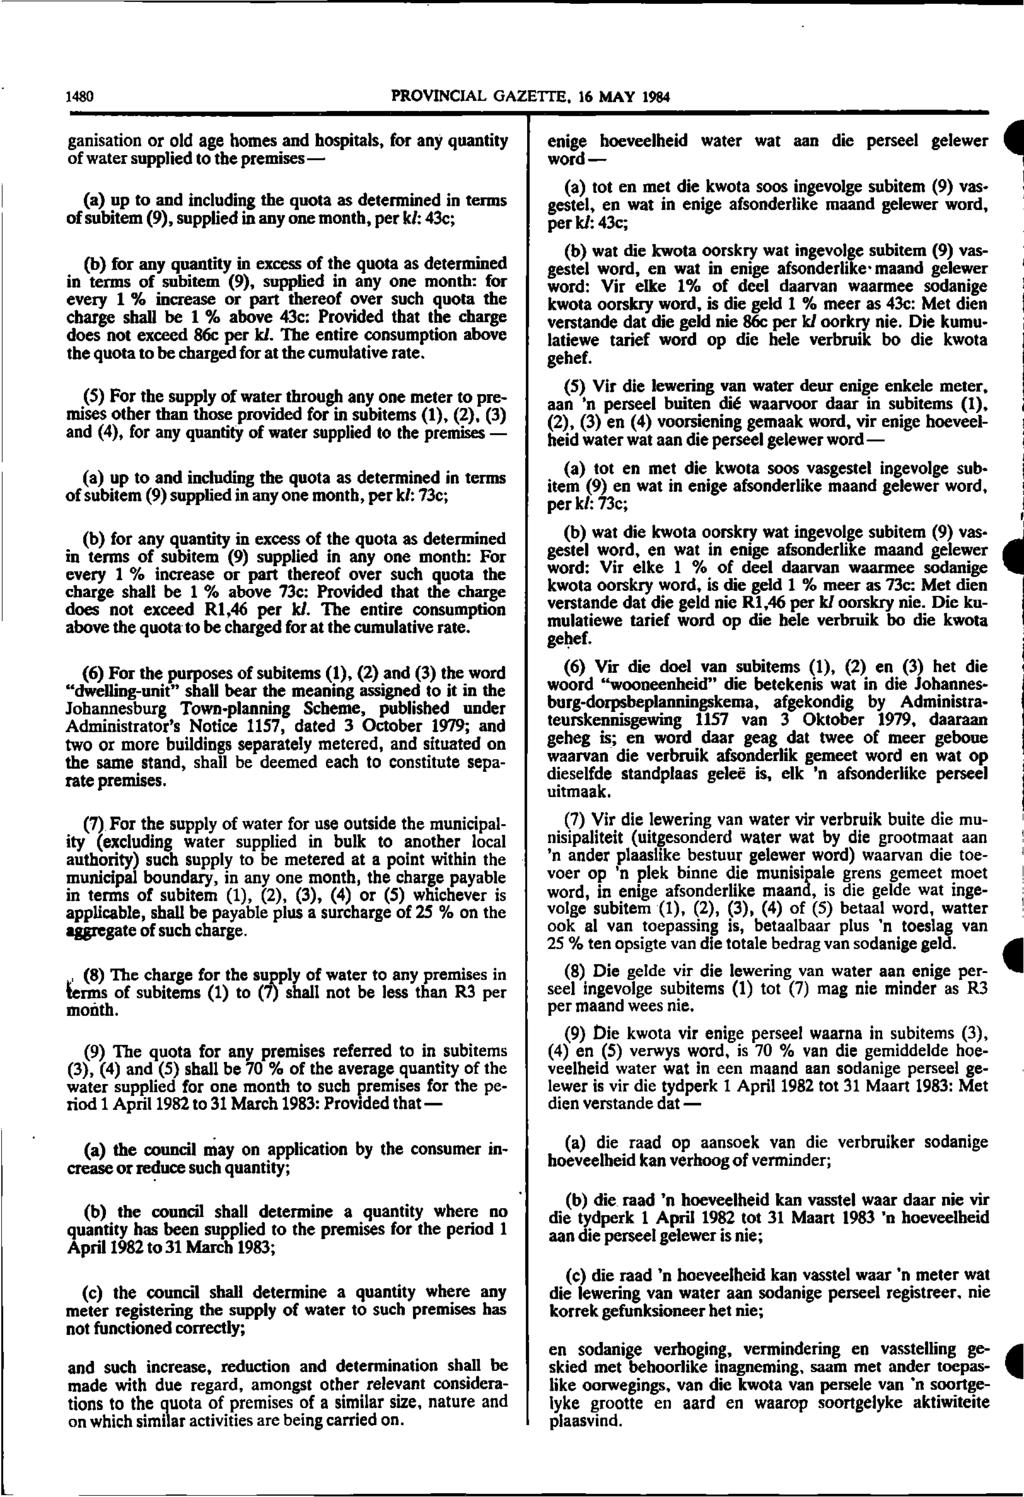 1480 PROVINCIAL GAZETTE, 16 MAY 1984 ganisation or old age homes and hospitals, for any quantity of water supplied to the premises (a) up to and including the quota as determined in terms of subitem